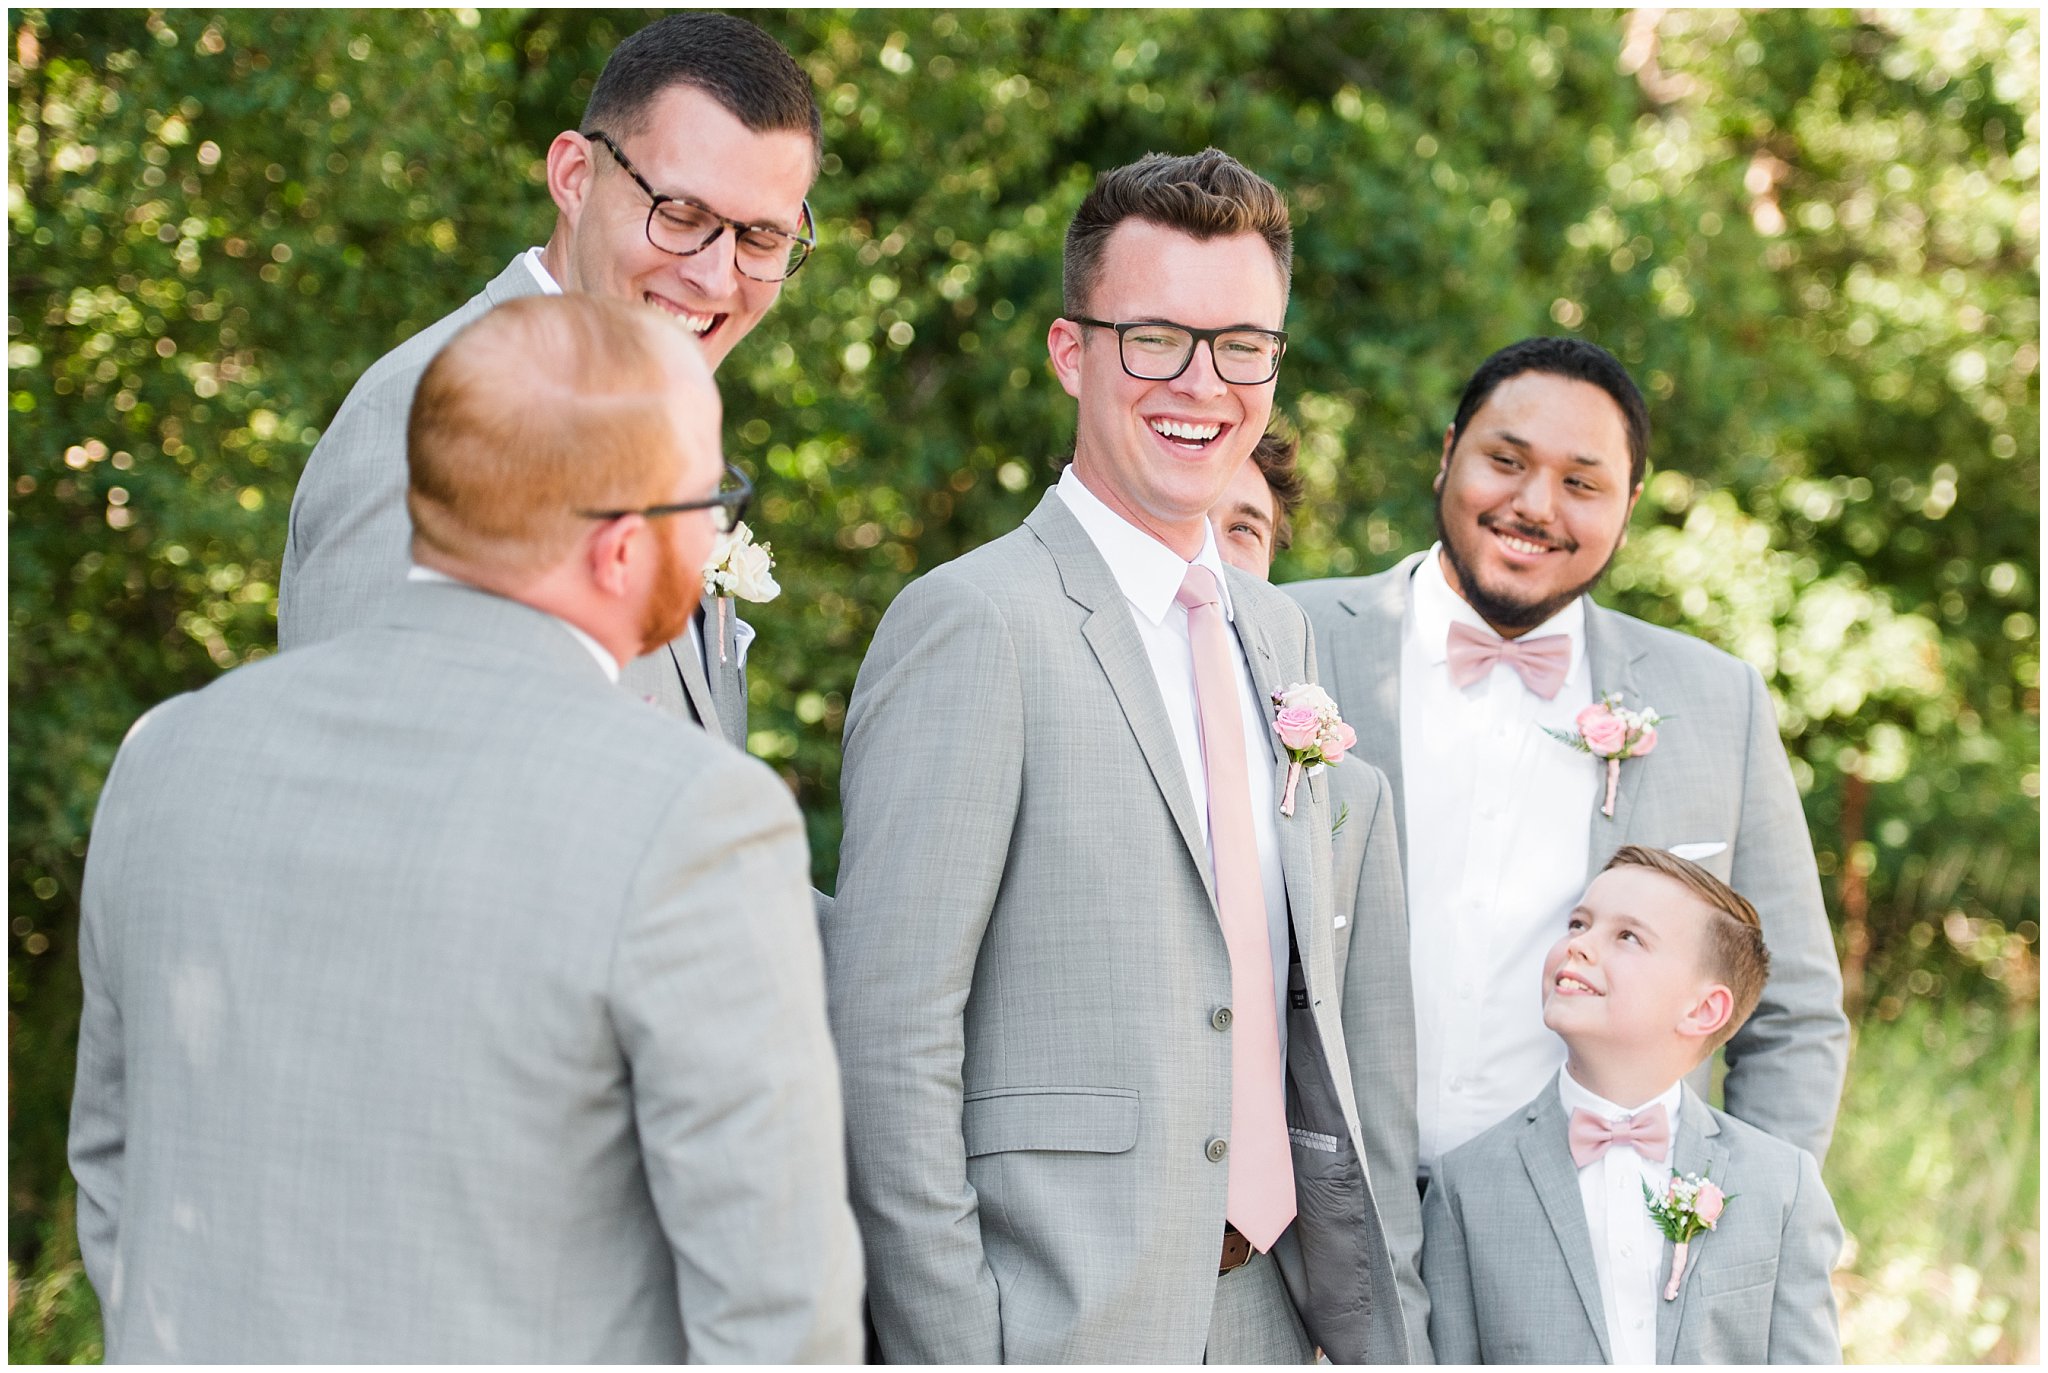 Groom and groomsmen laugh in gray suits with blush ties | Oak Hills Utah Dusty Rose and Gray Summer Wedding | Jessie and Dallin Photography